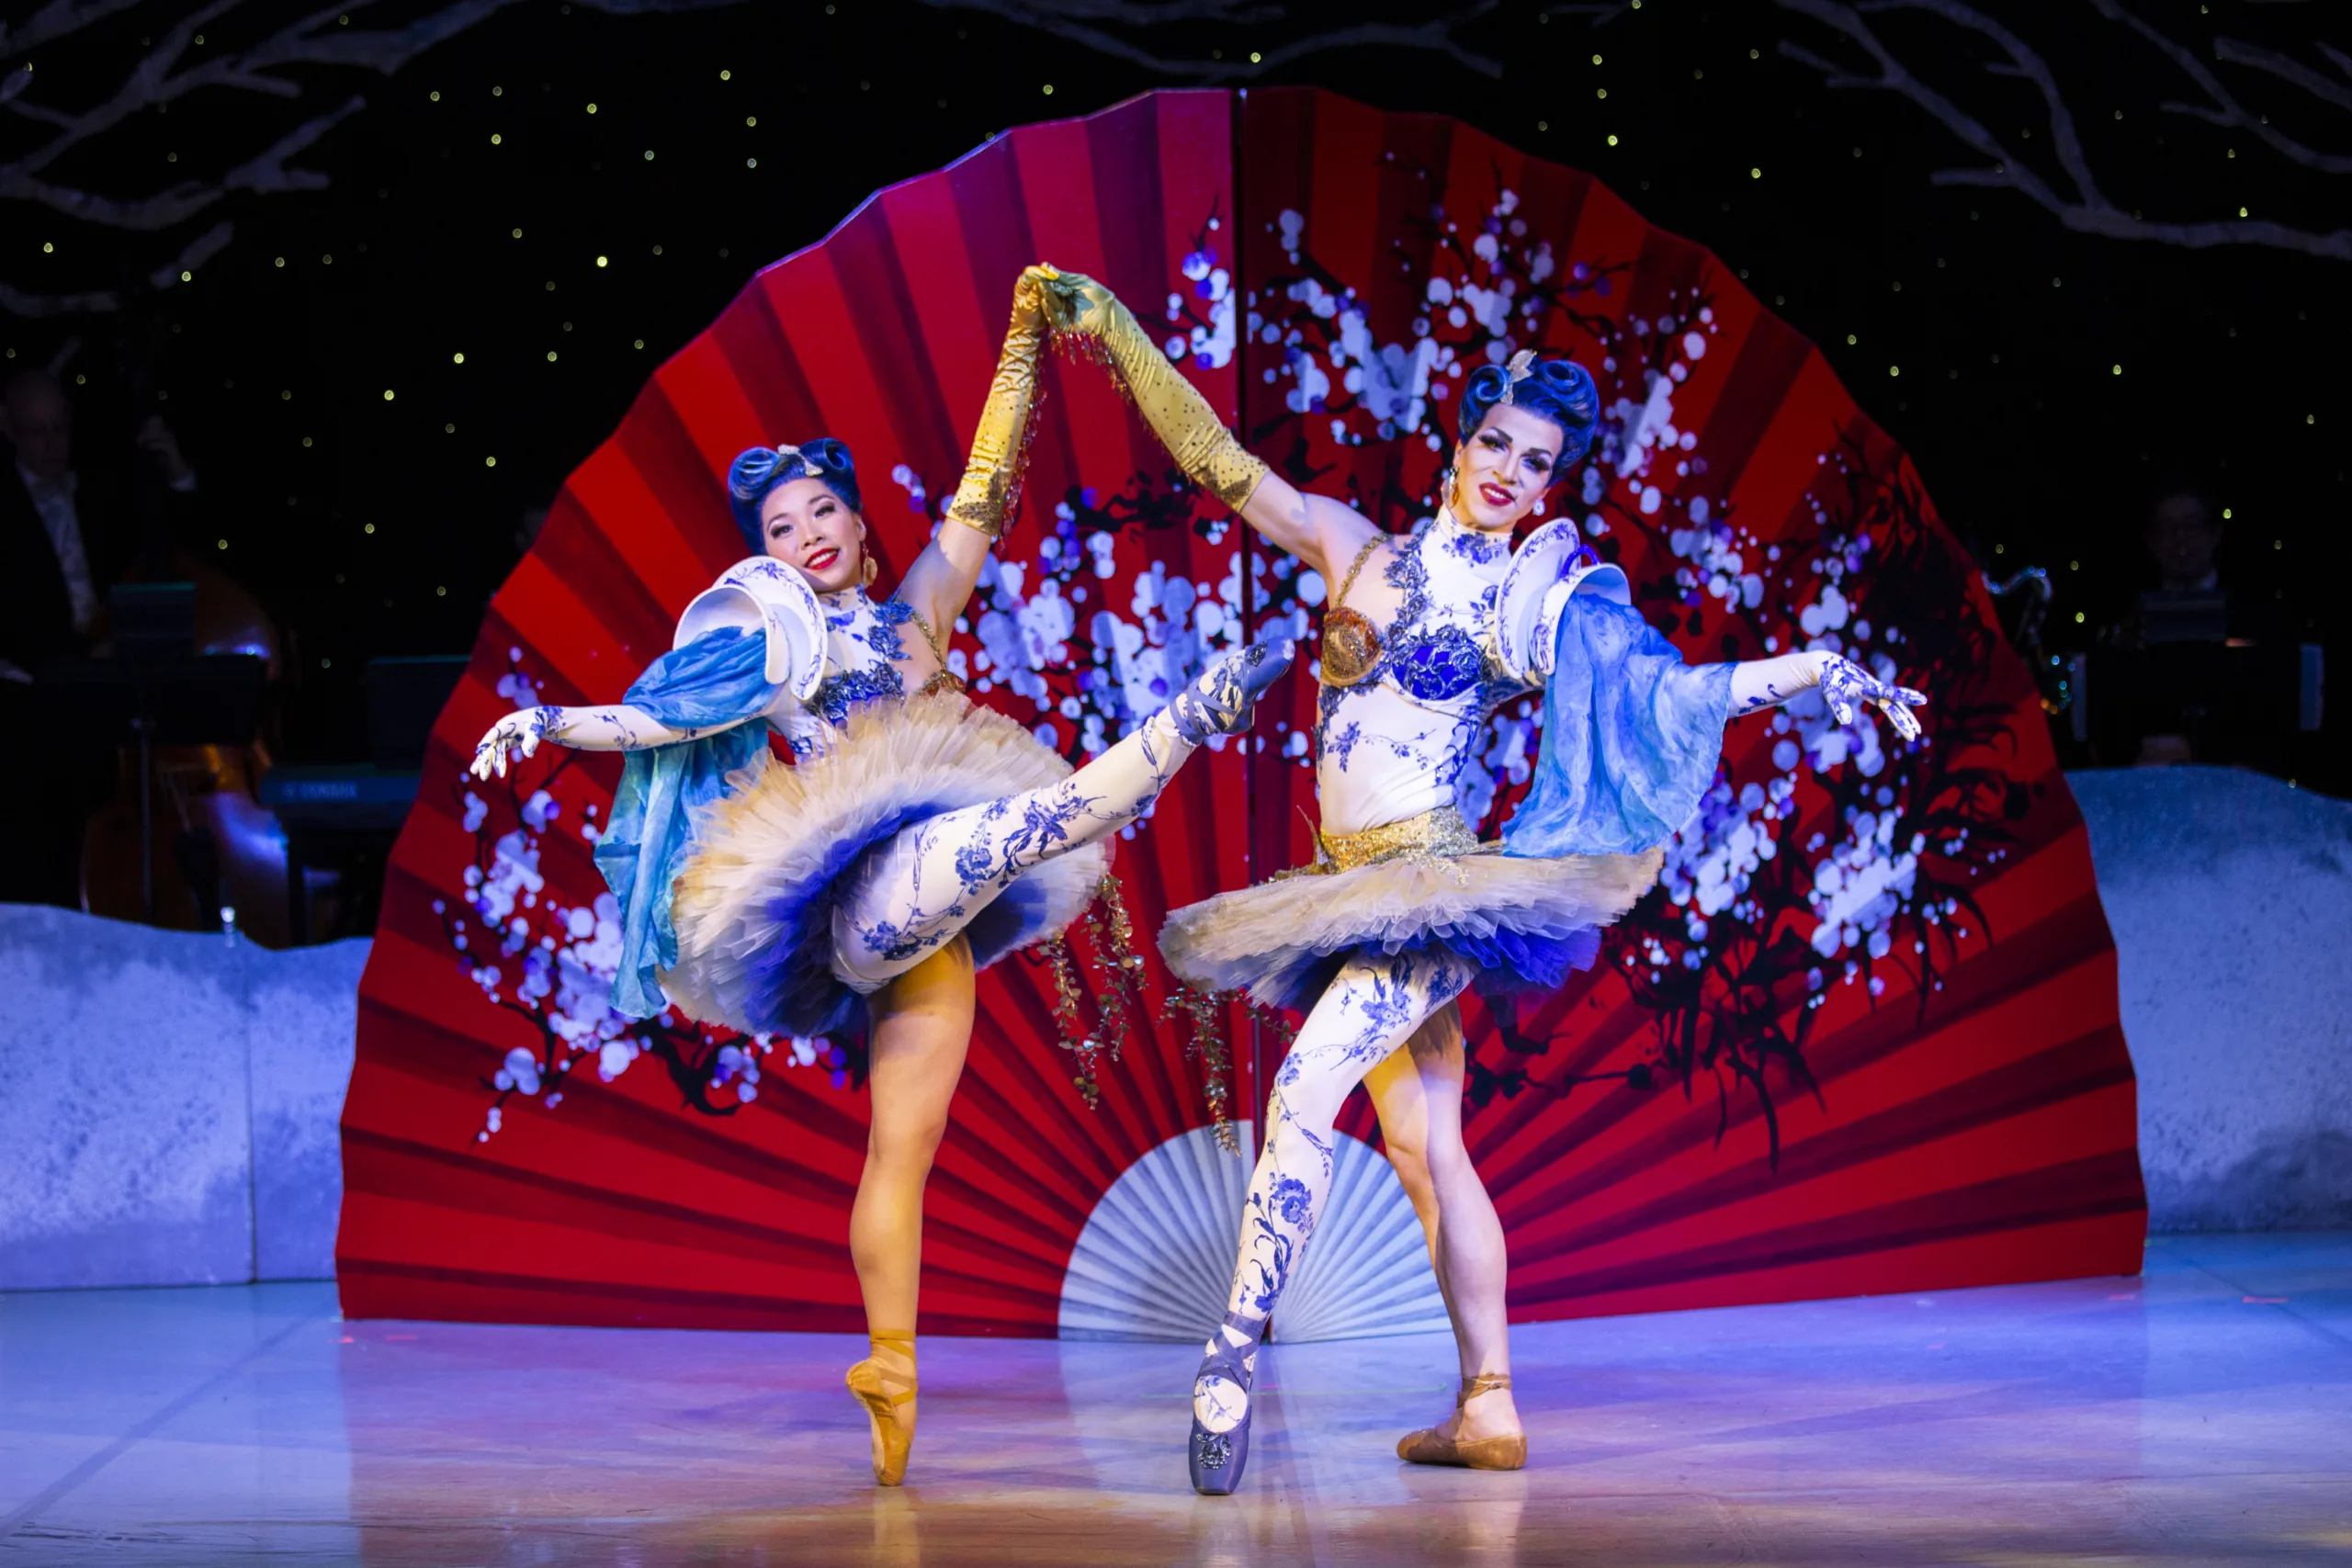 Two dancers in tutus hold hands while a giant fan is displayed behind them